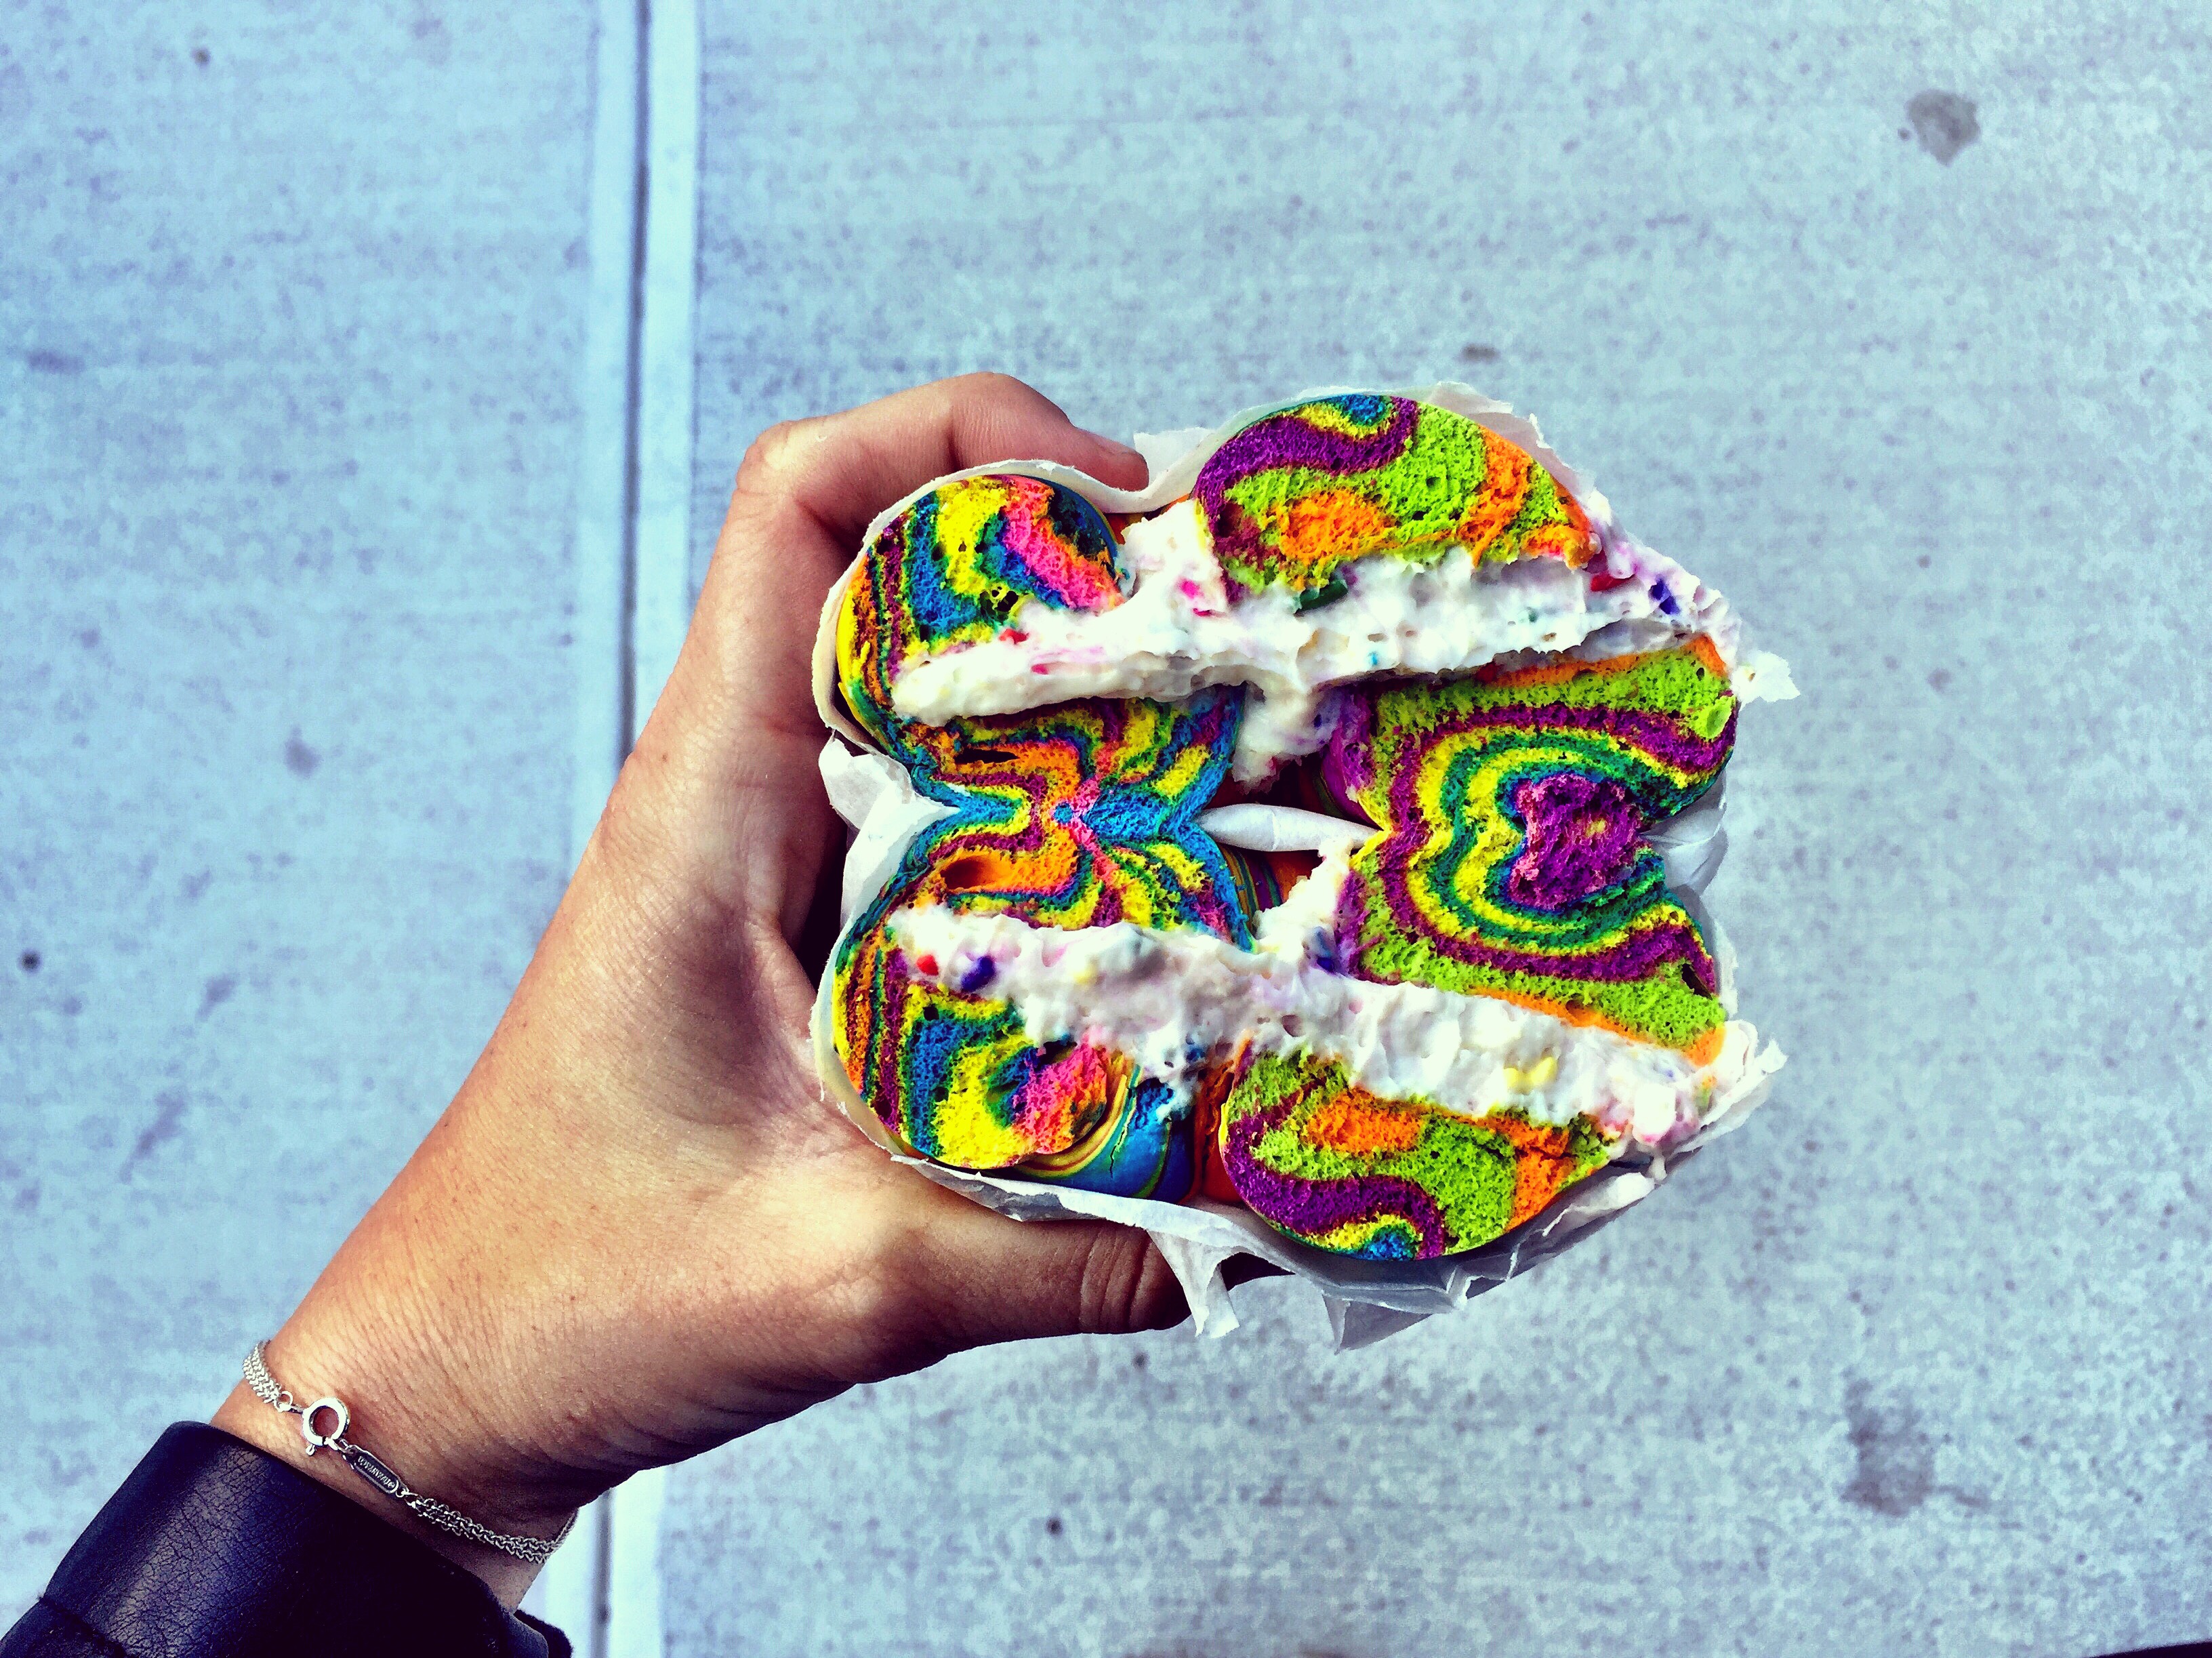 Everybody is trekking to Brooklyn to get their hands on every food blogger's dream, the Rainbow Bagel.